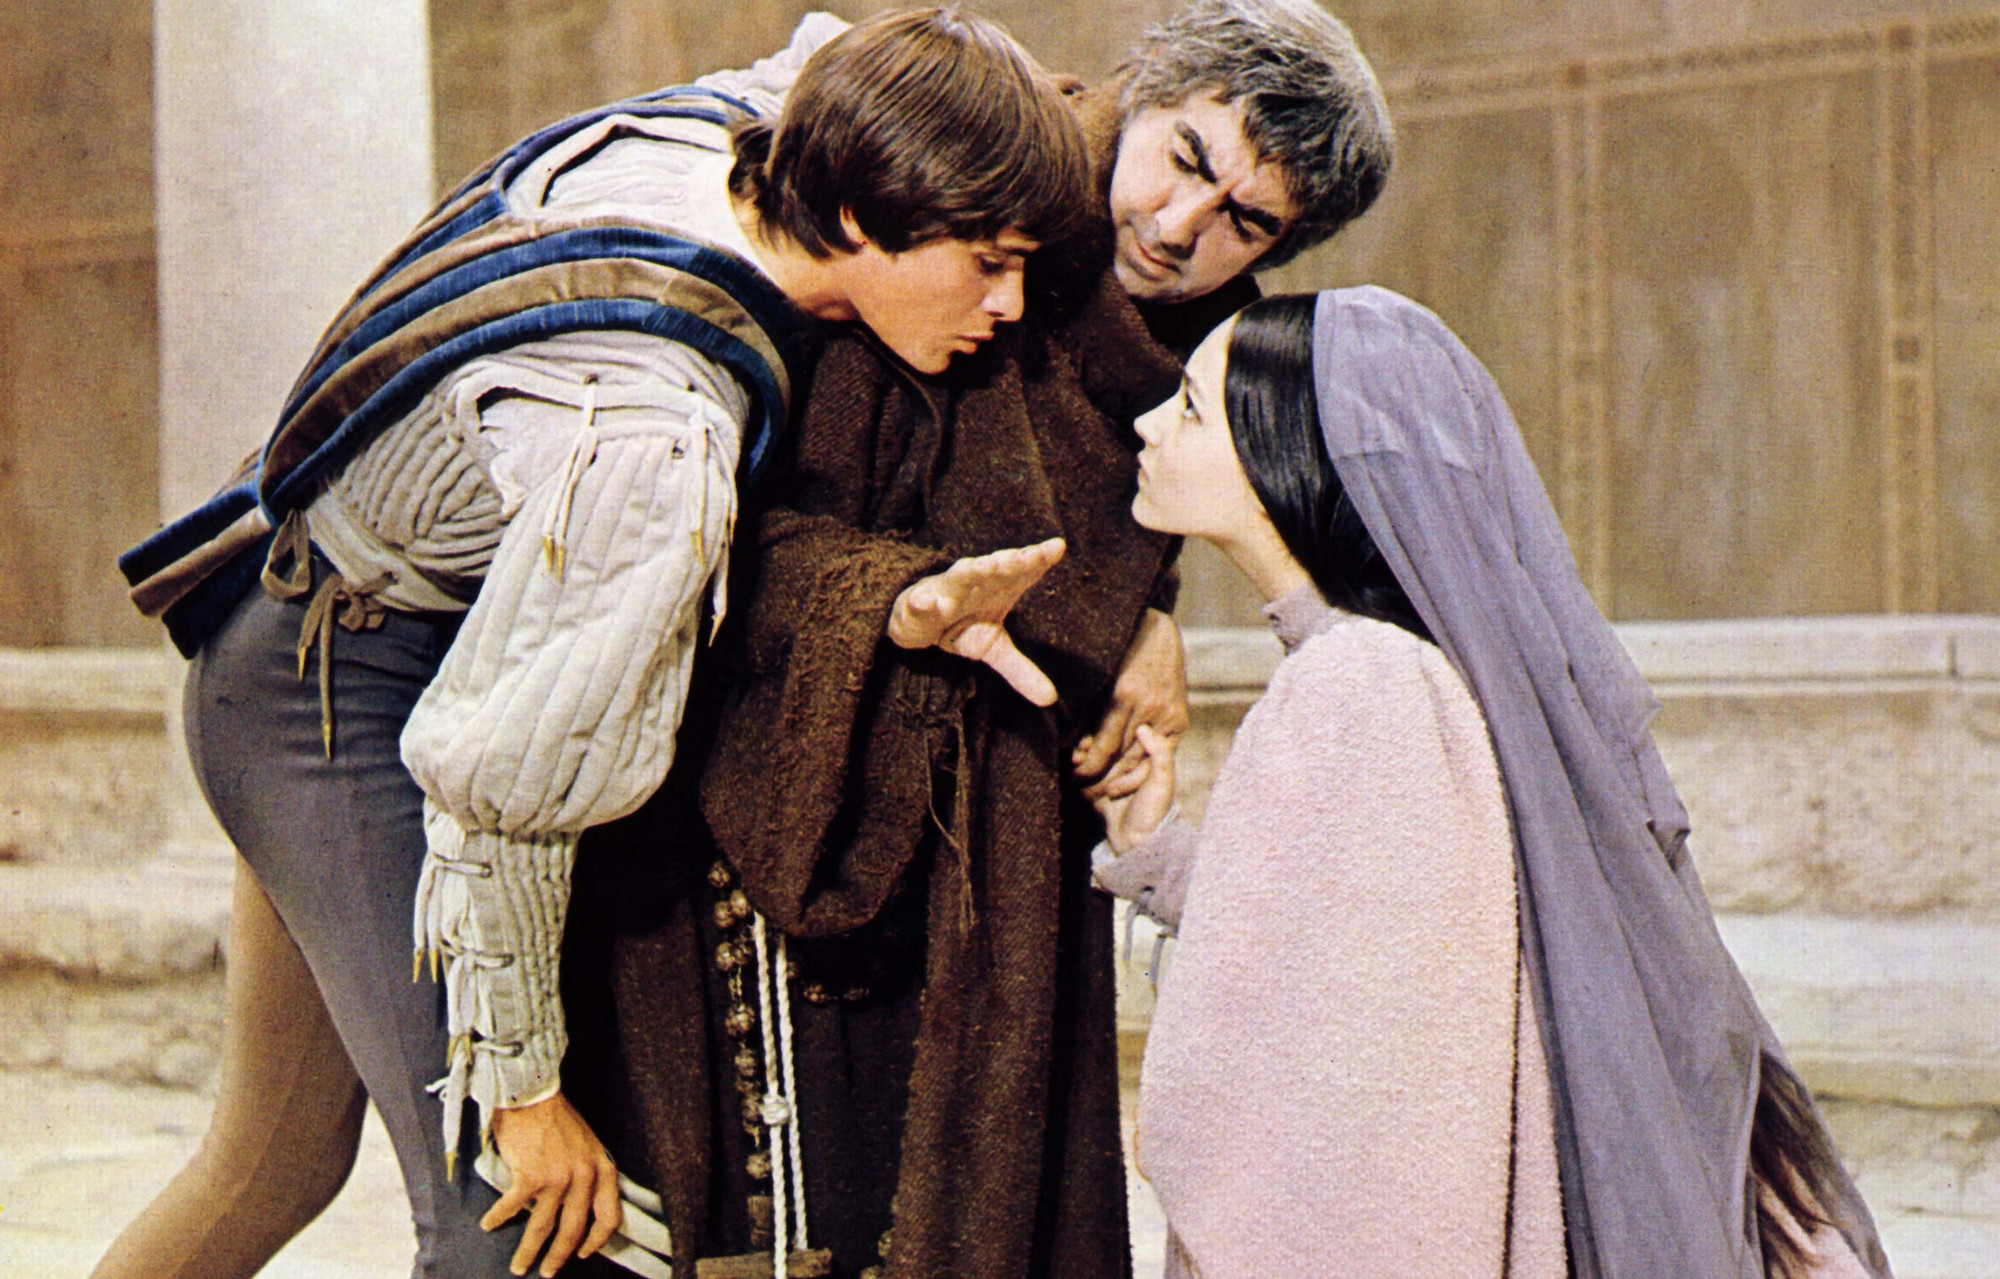 Romeo and Juliet. 1968. Directed by Franco Zeffirelli MoMA